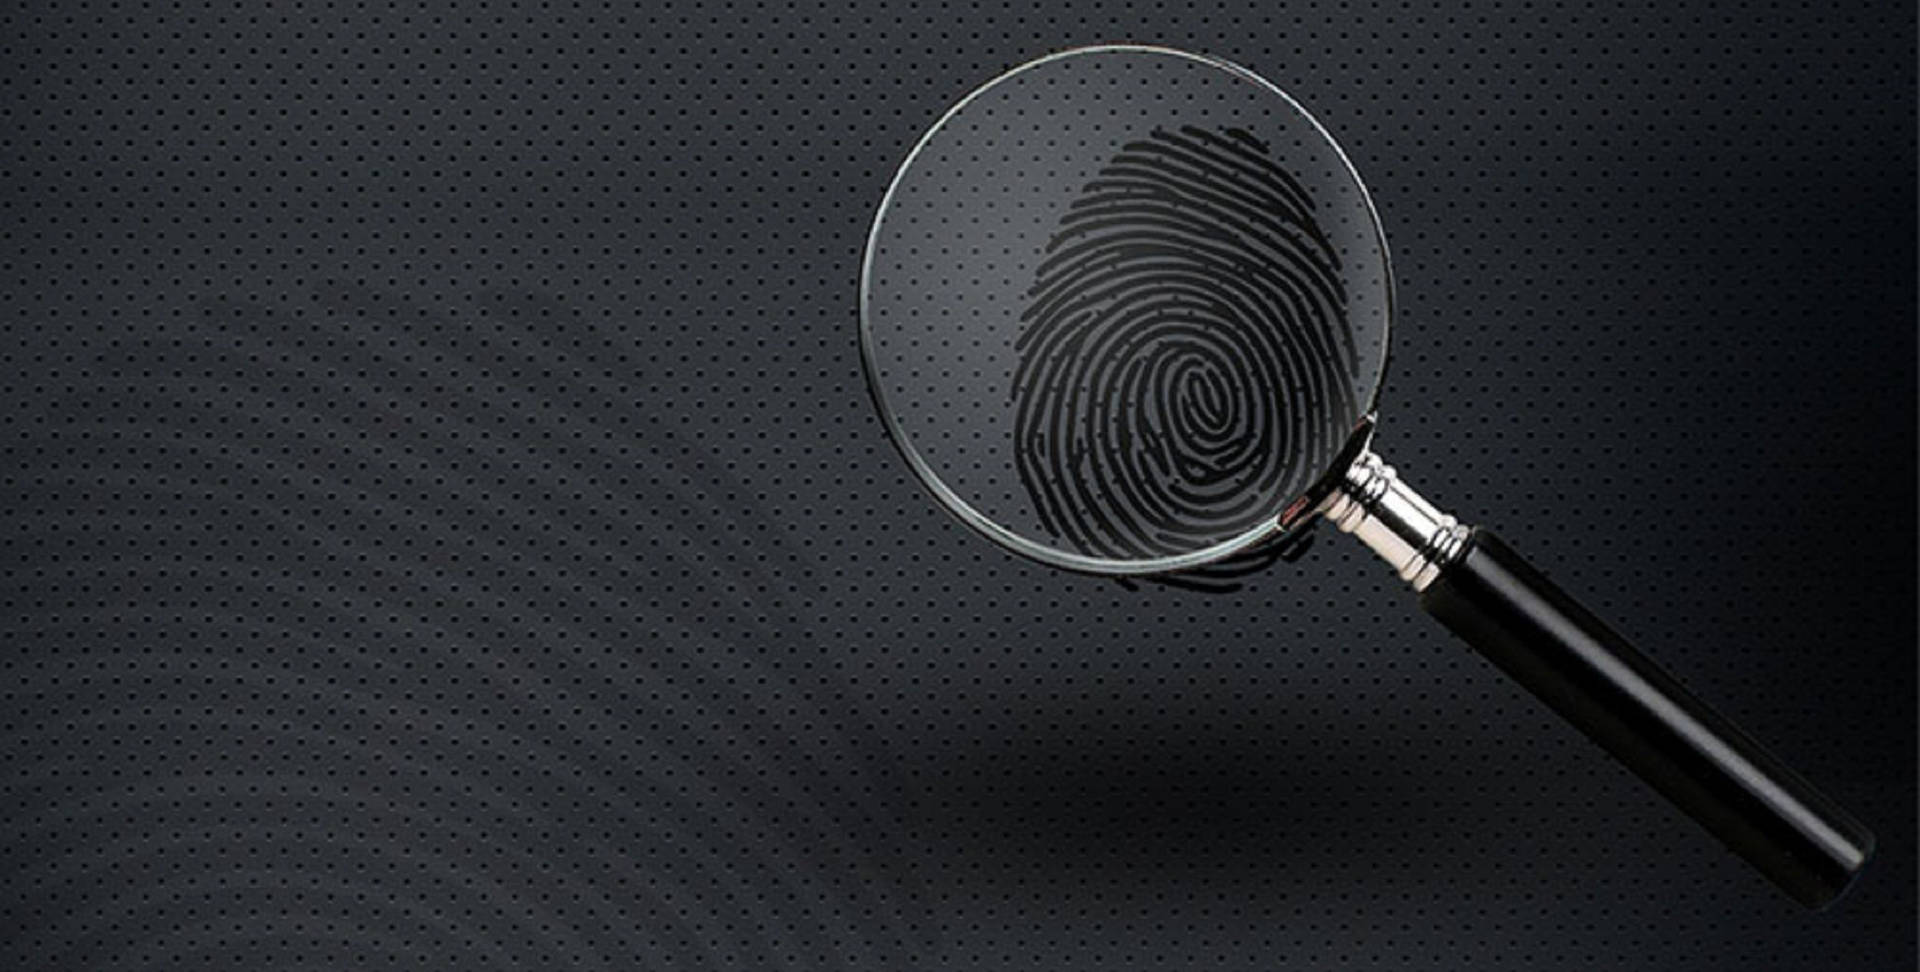 Detective Analyzing Fingerprints with Magnifying Glass Wallpaper